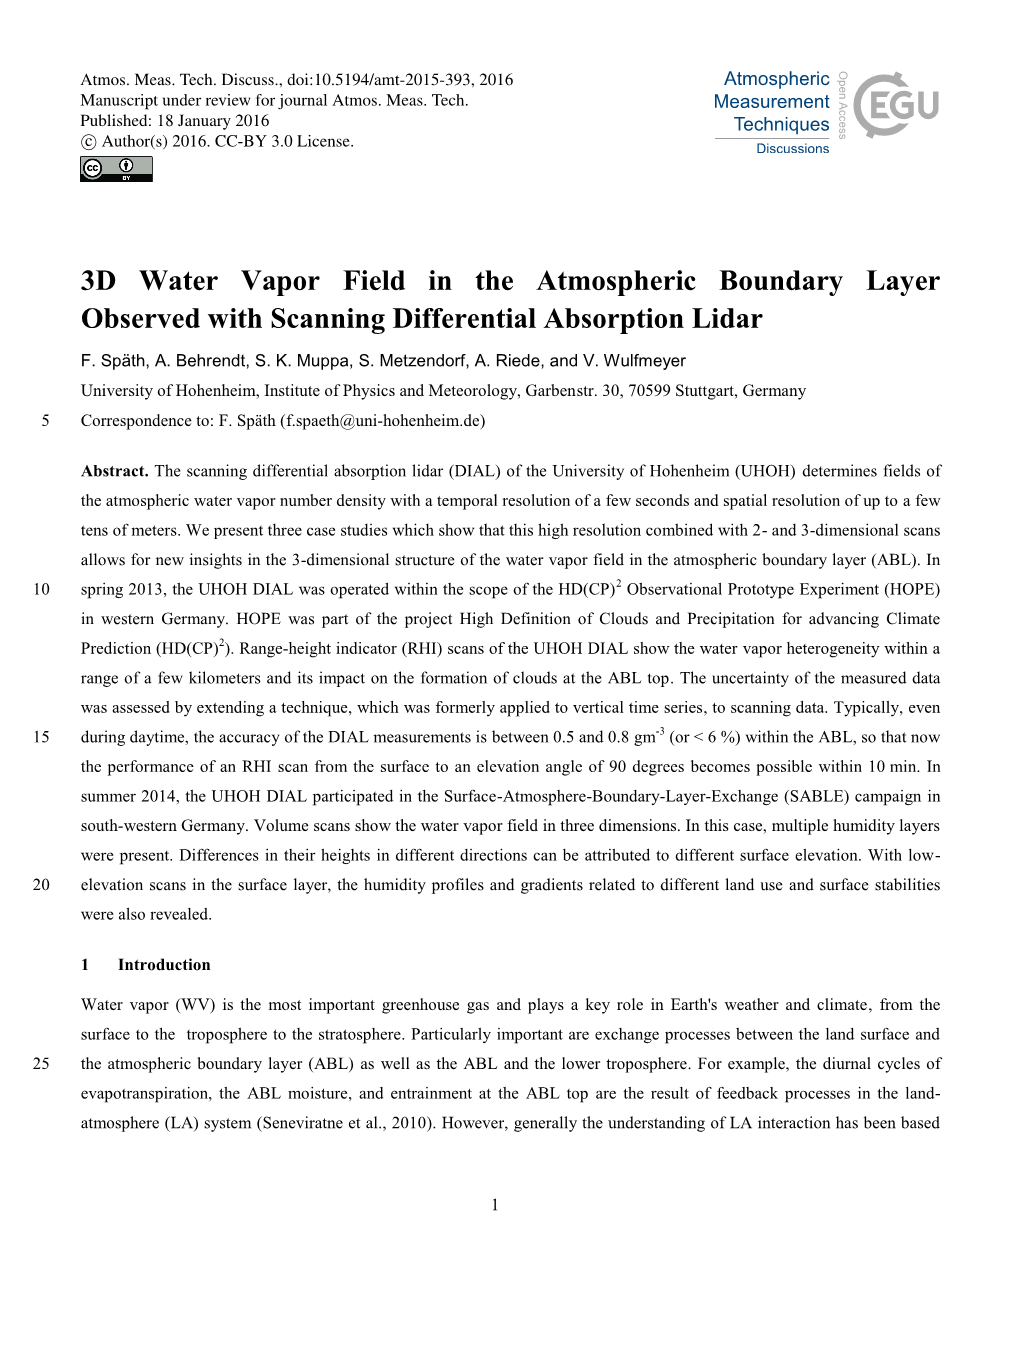 3D Water Vapor Field in the Atmospheric Boundary Layer Observed with Scanning Differential Absorption Lidar